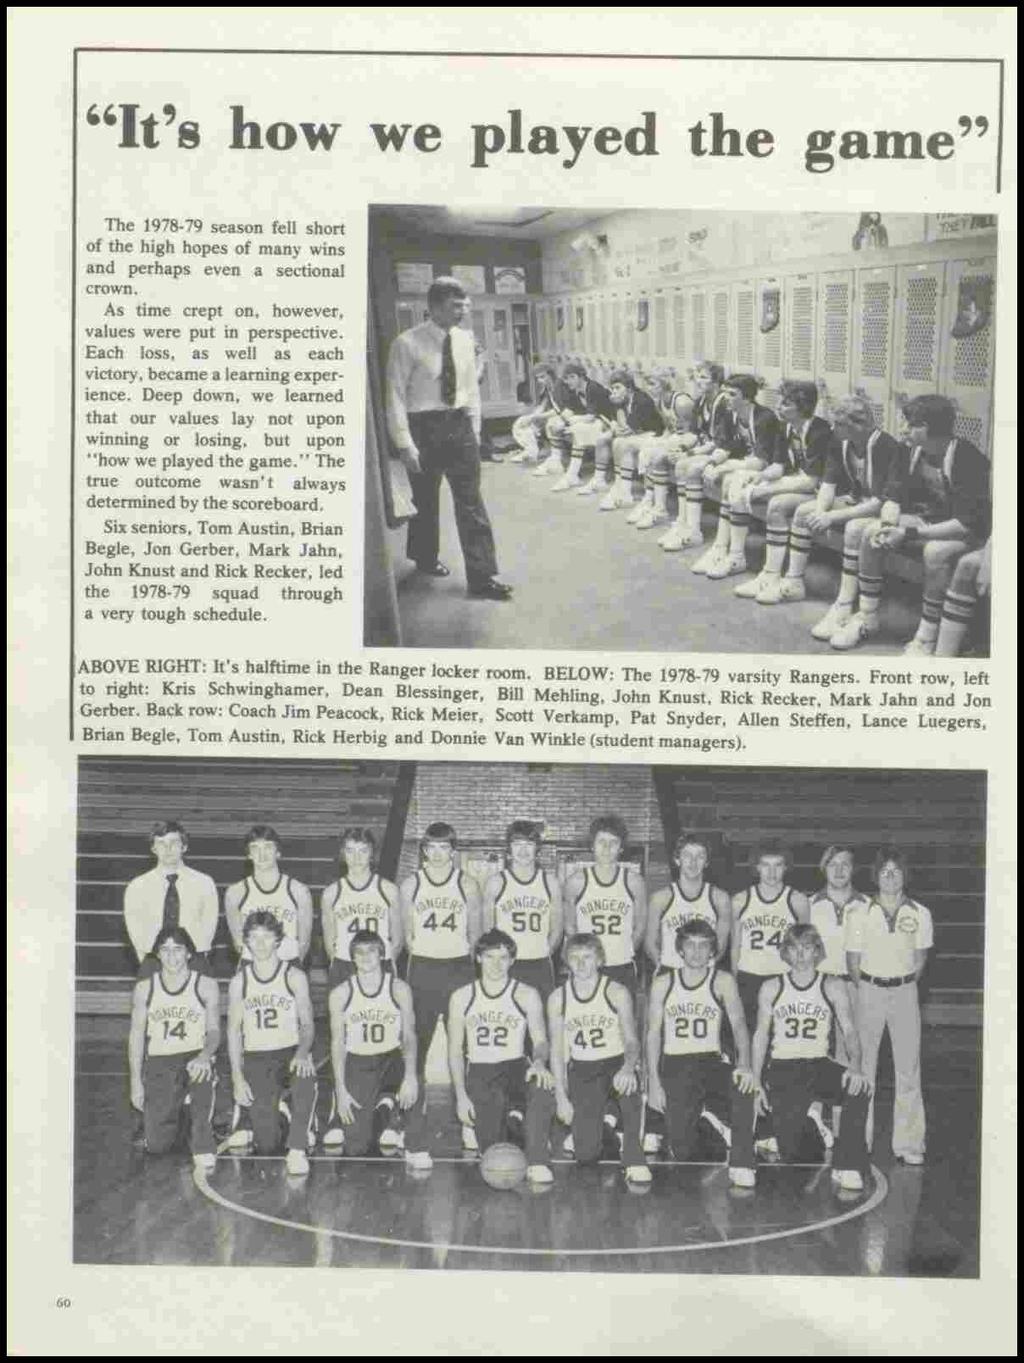 "It's how we played the game" The 1978-79 season fell short of the high hopes of many wins and perhaps even a sectional crown. As time crept on, however, values were put in perspective.